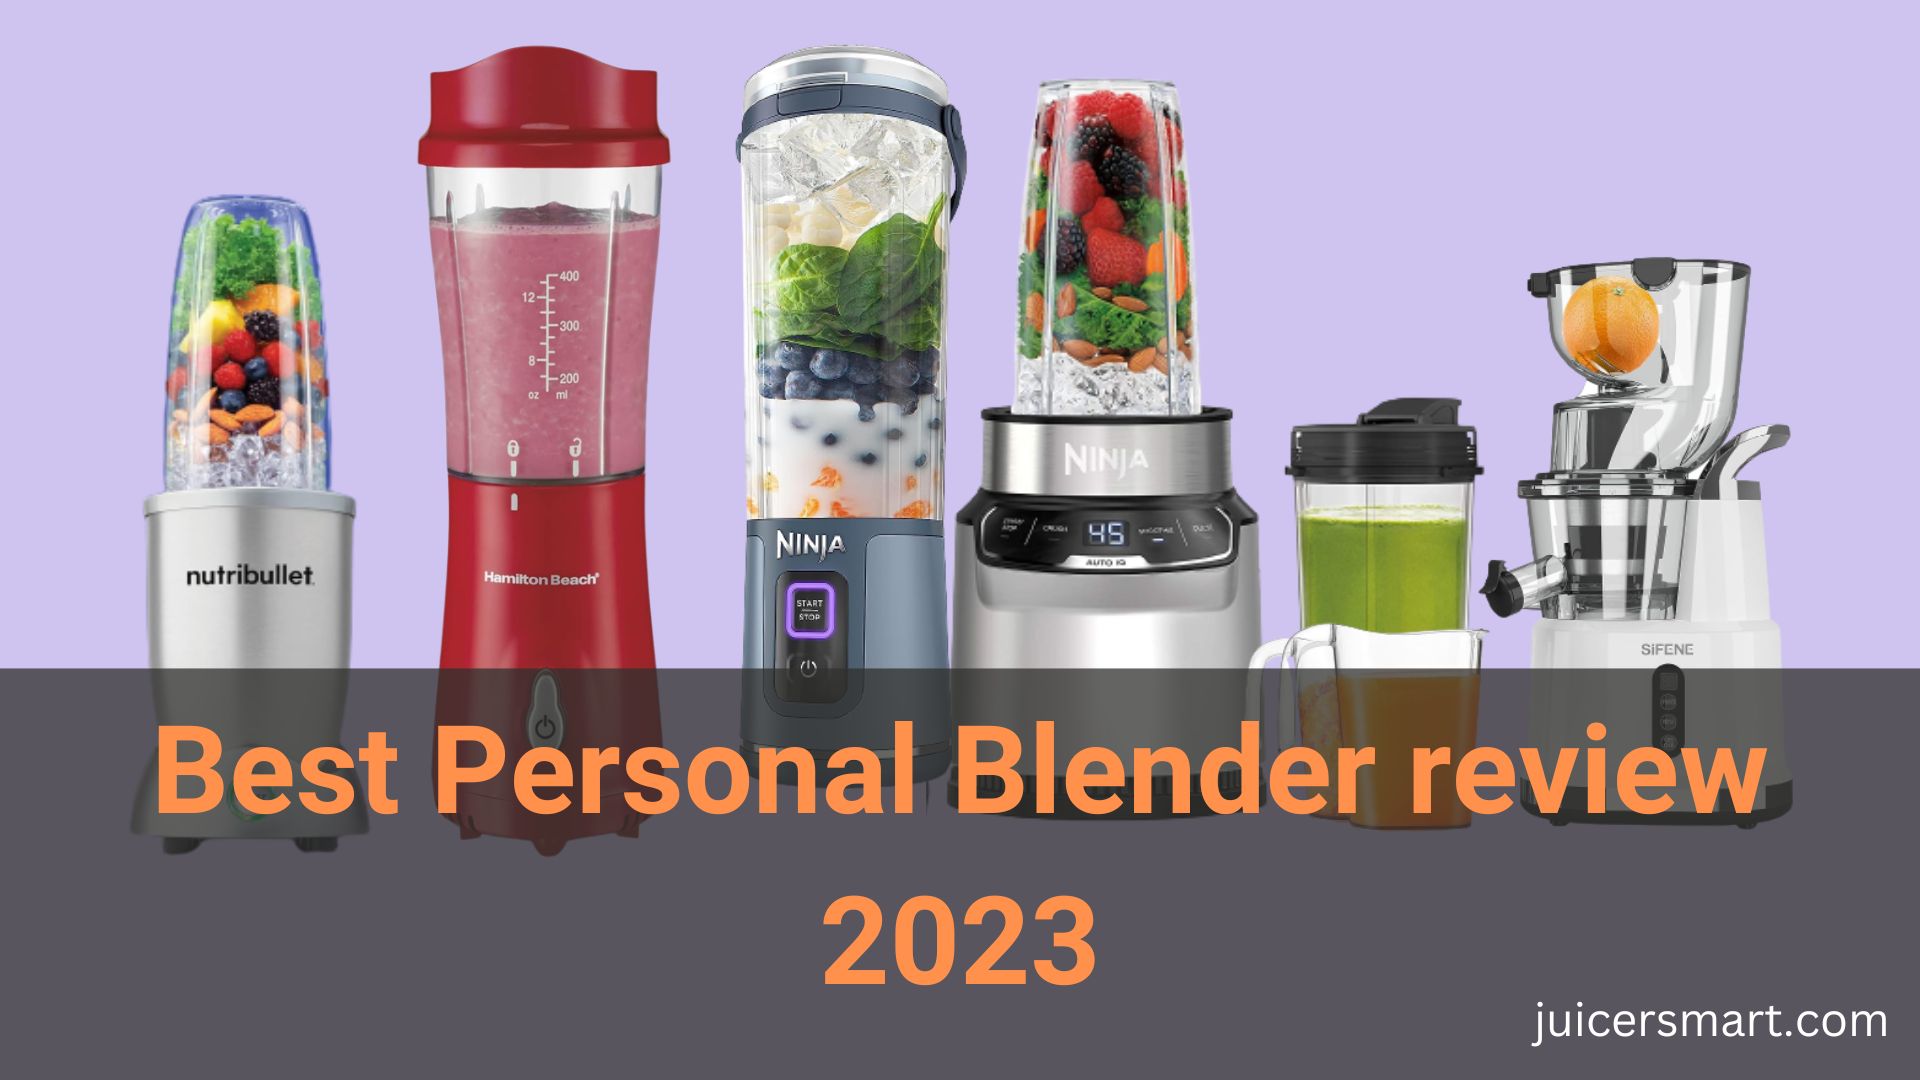 Best Personal Blender review 2023